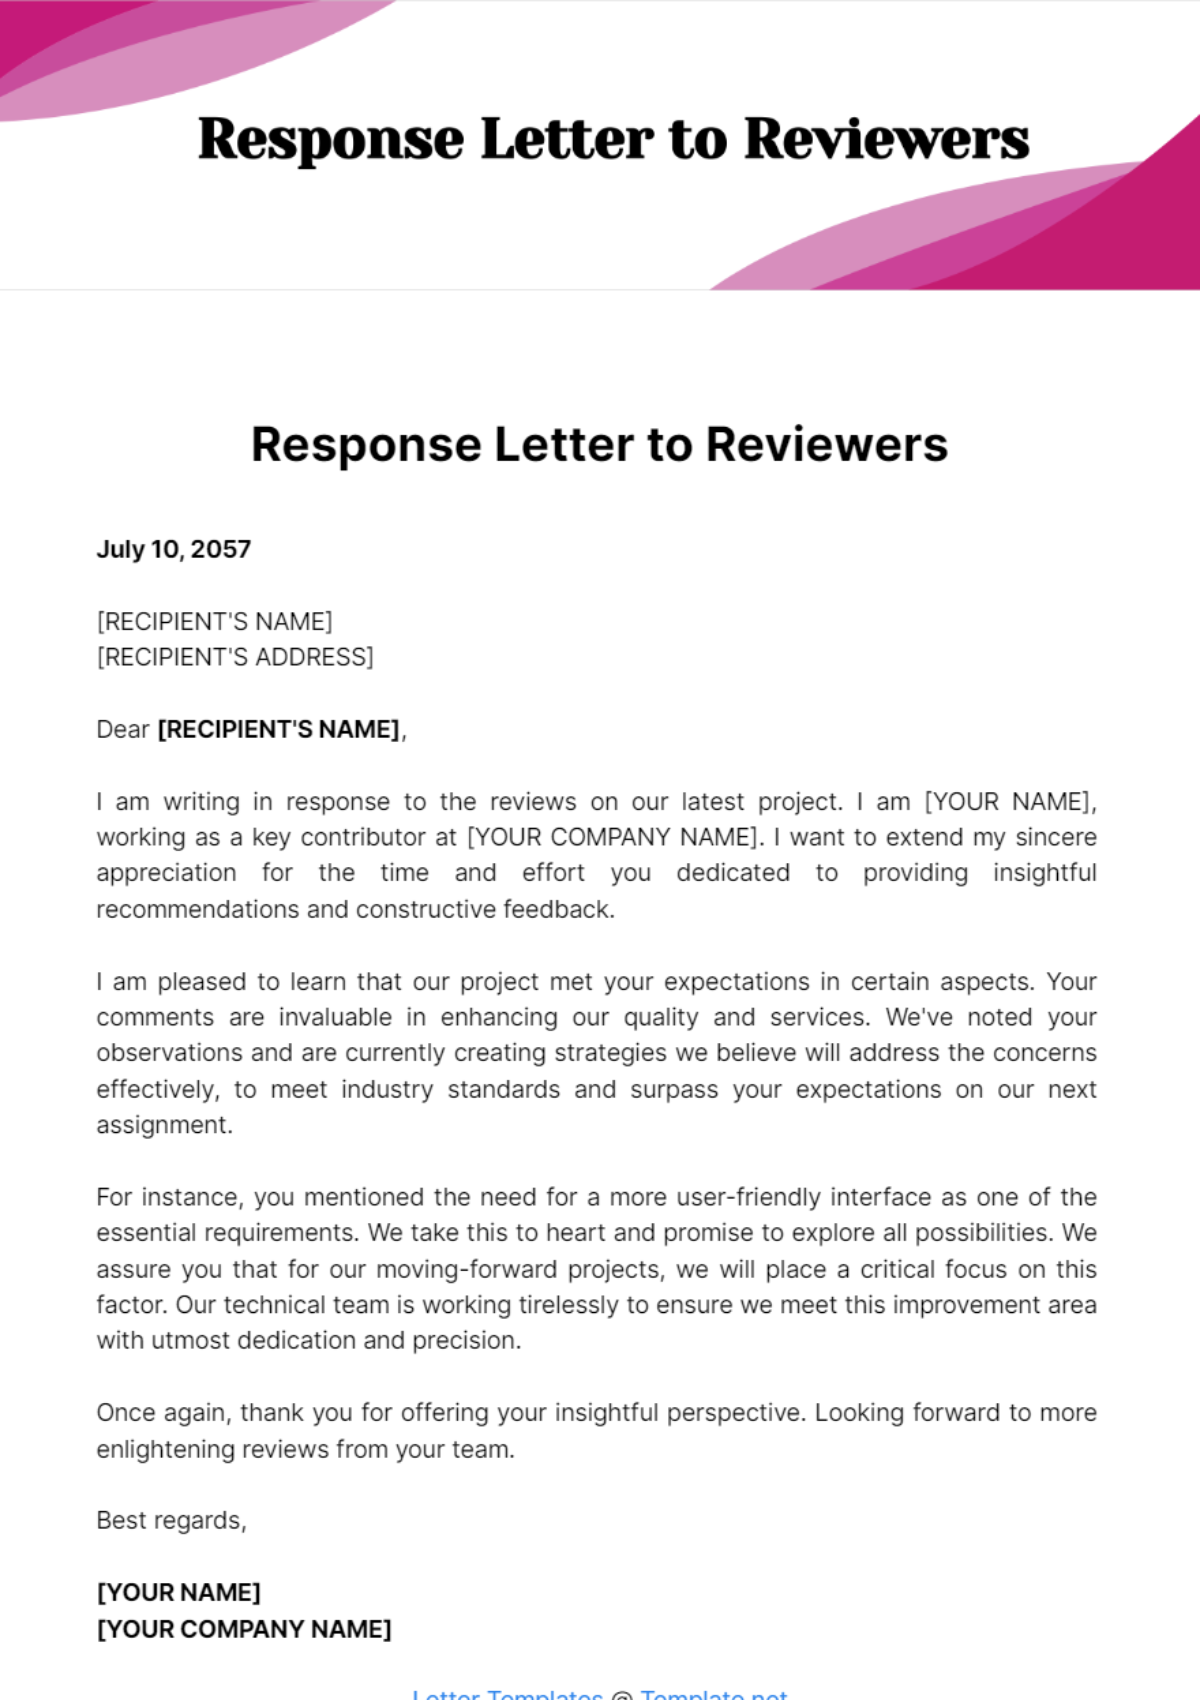 Response Letter to Reviewers Template